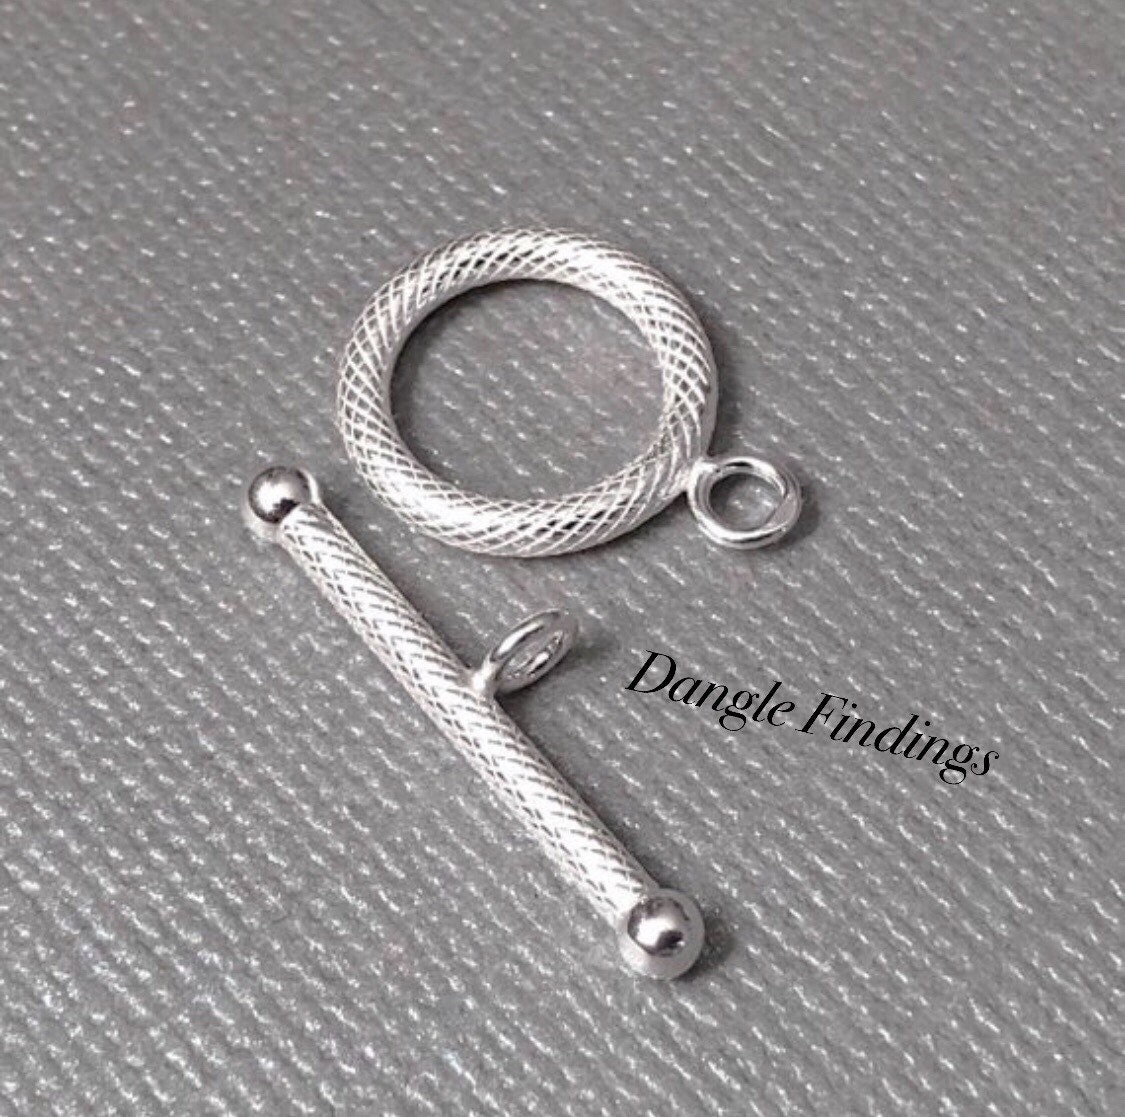 Decorative Clip Hook Pendant connector*sterling Silver 925*ODL-00818 13,5x21,5 mm